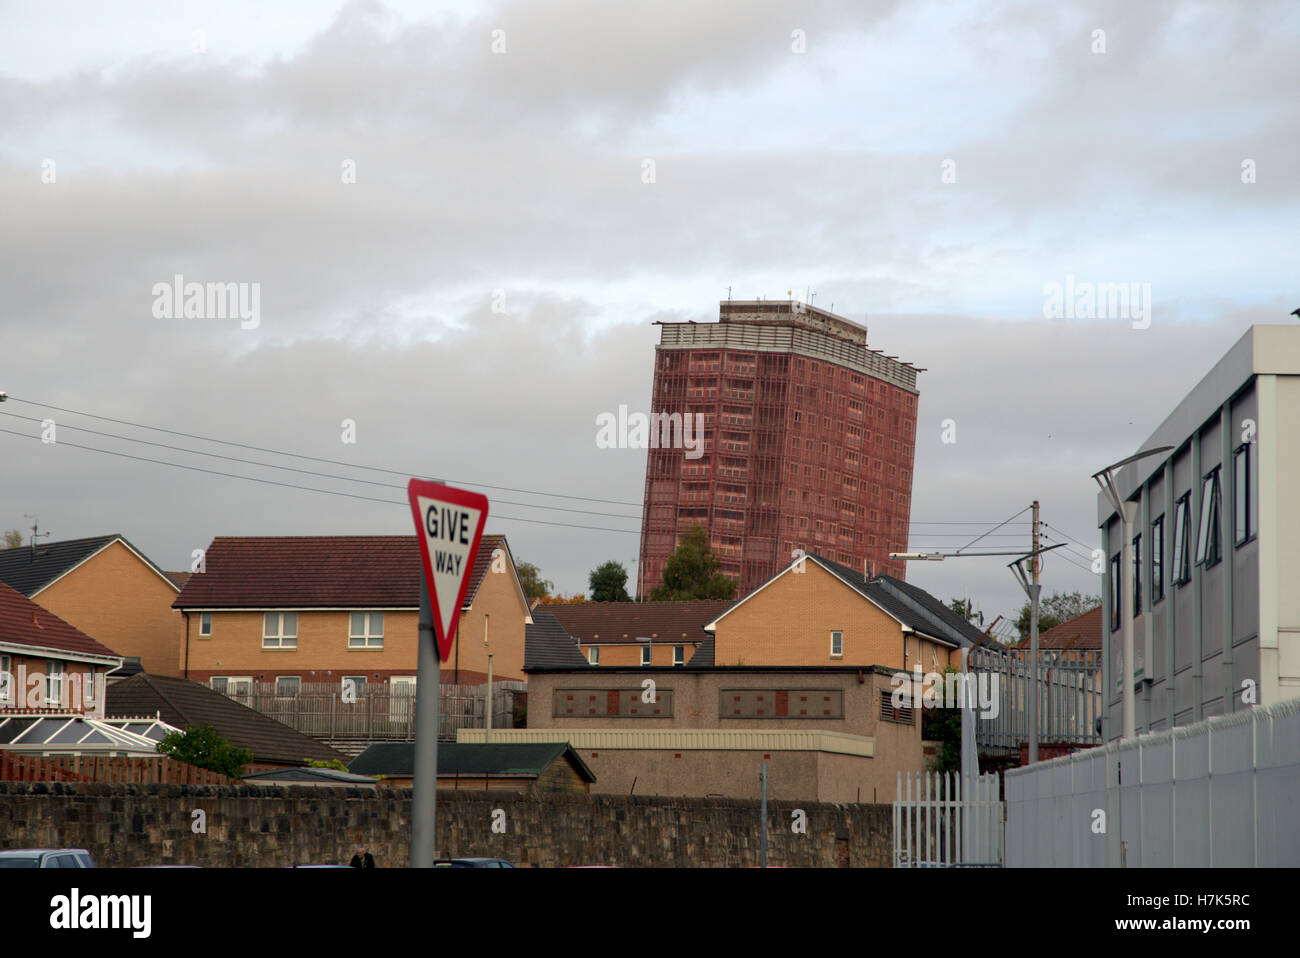 Red Road Flats Glasgow demolition of the highest flats in Europe Stock Photo